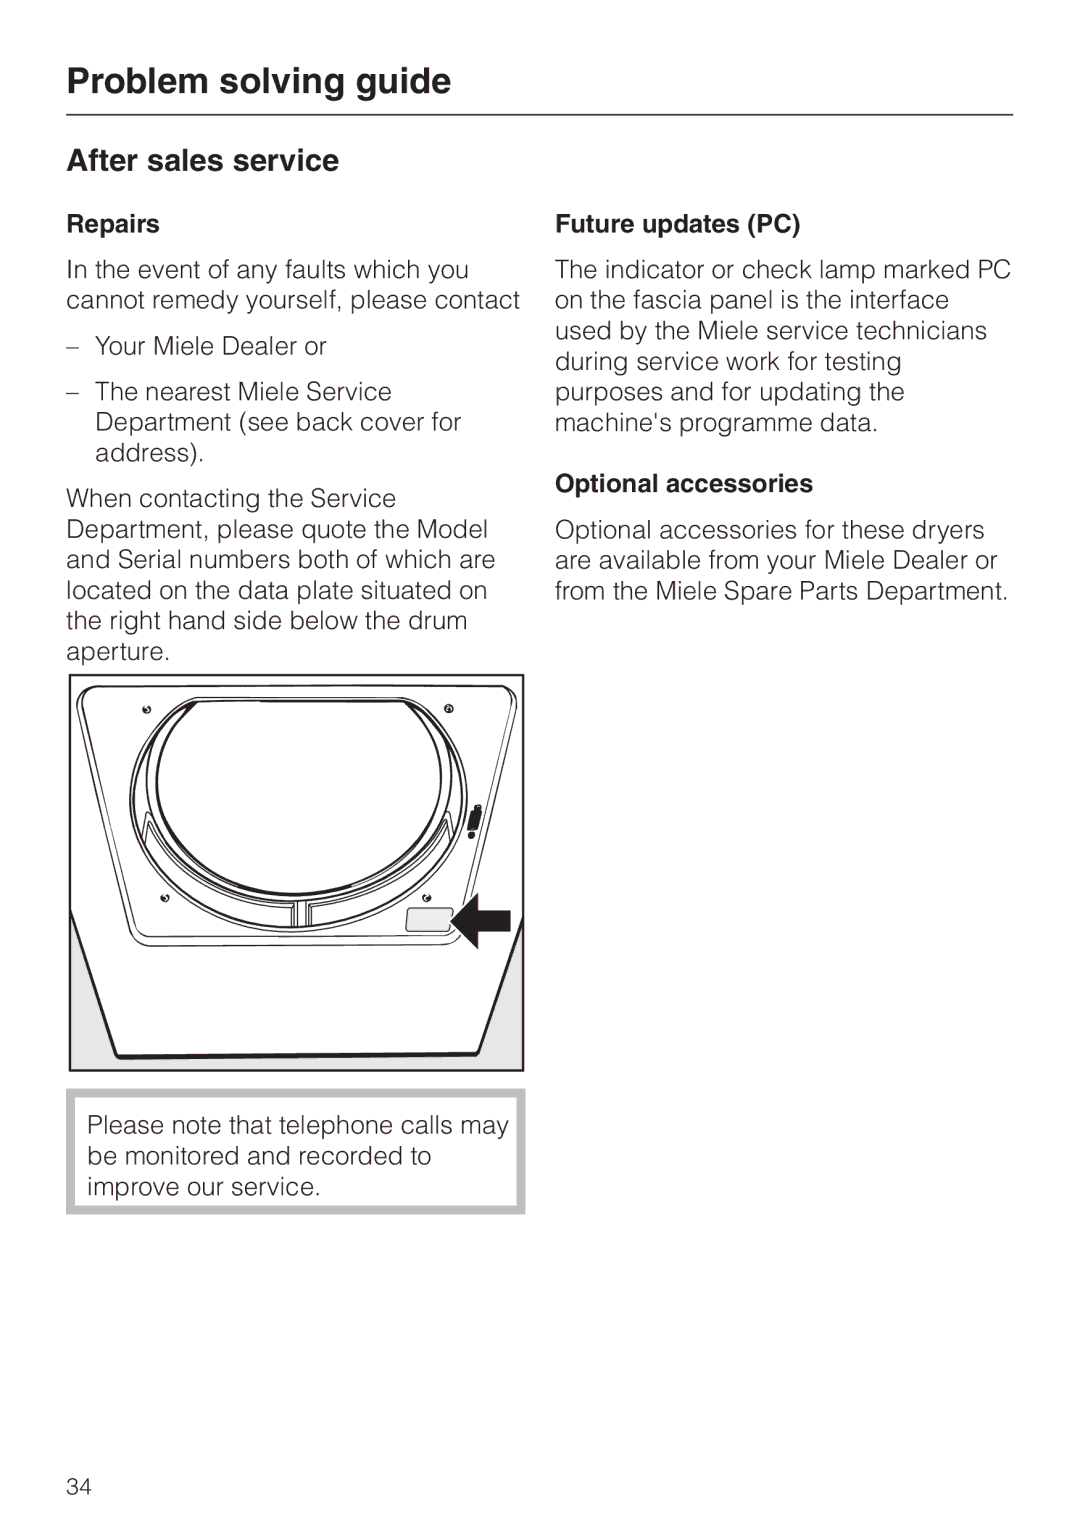 Miele T 4422 C operating instructions After sales service, Repairs, Future updates PC, Optional accessories 